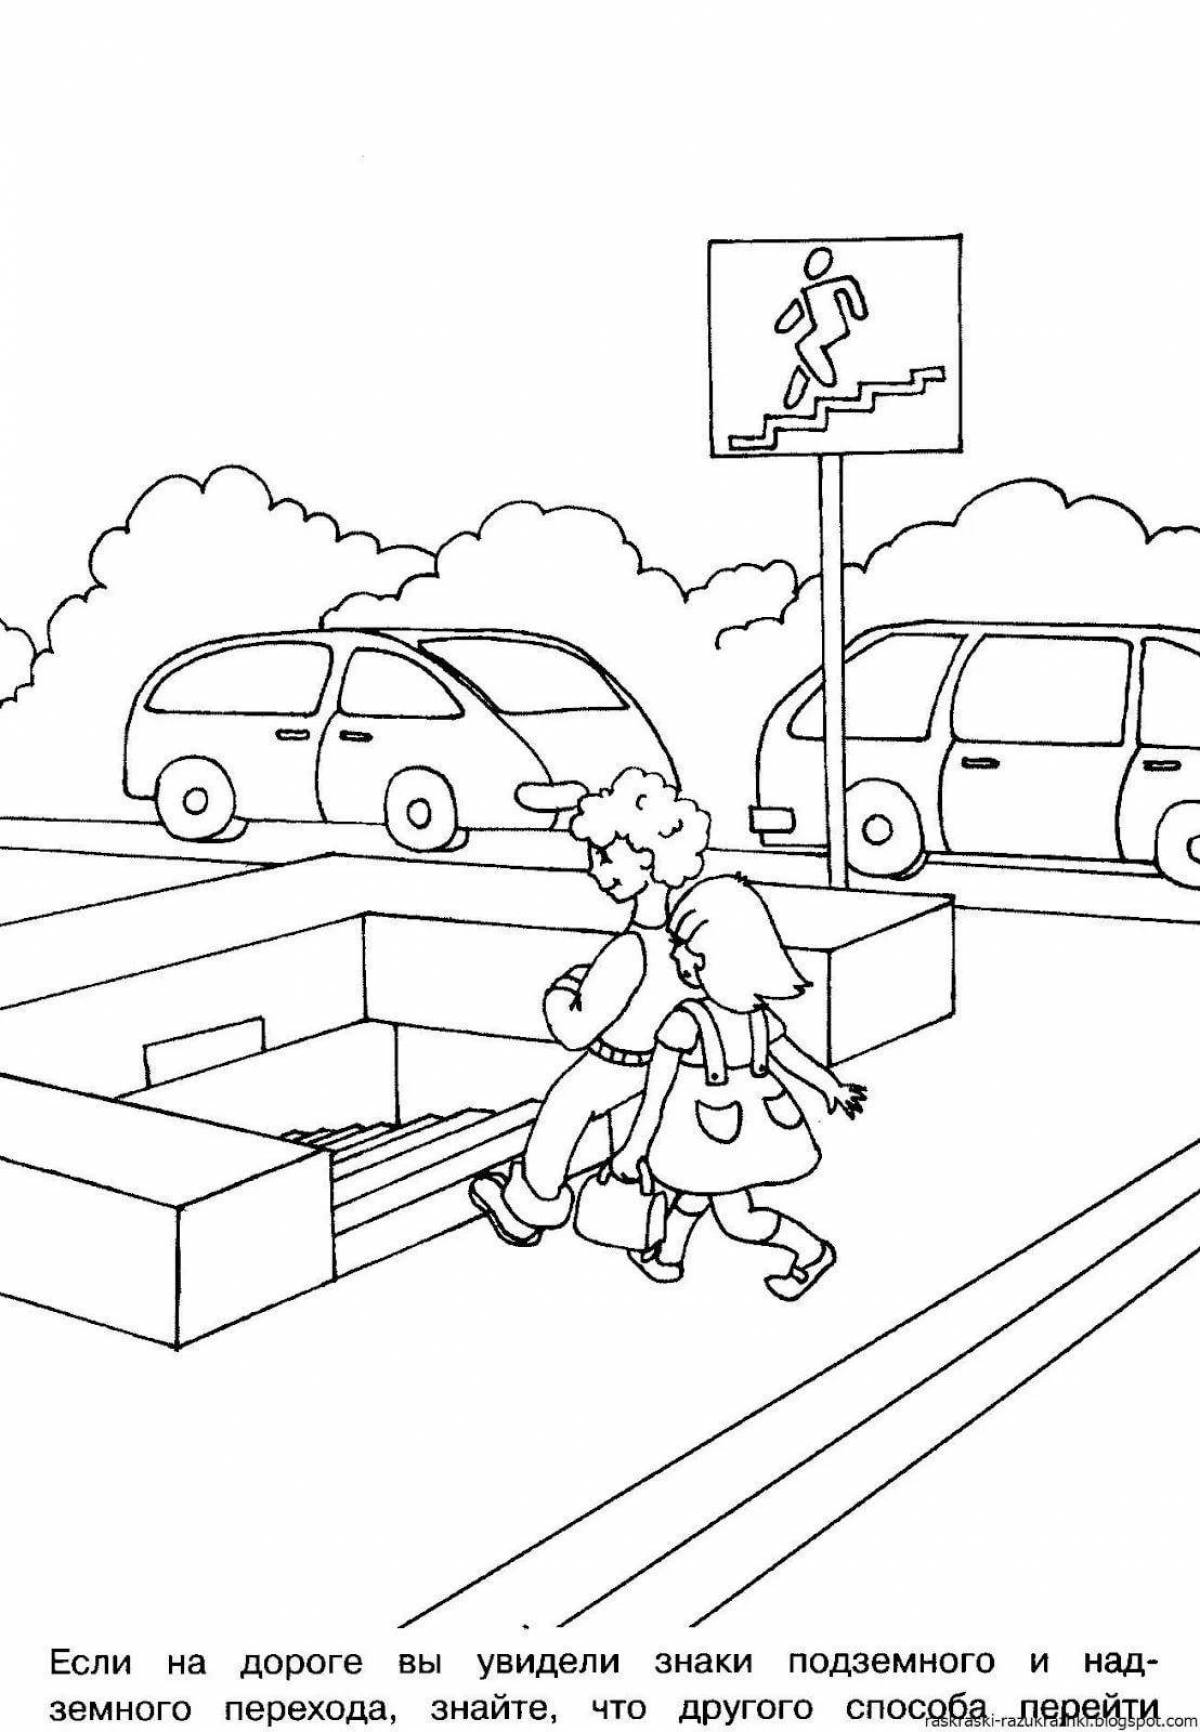 Splendid way home coloring page